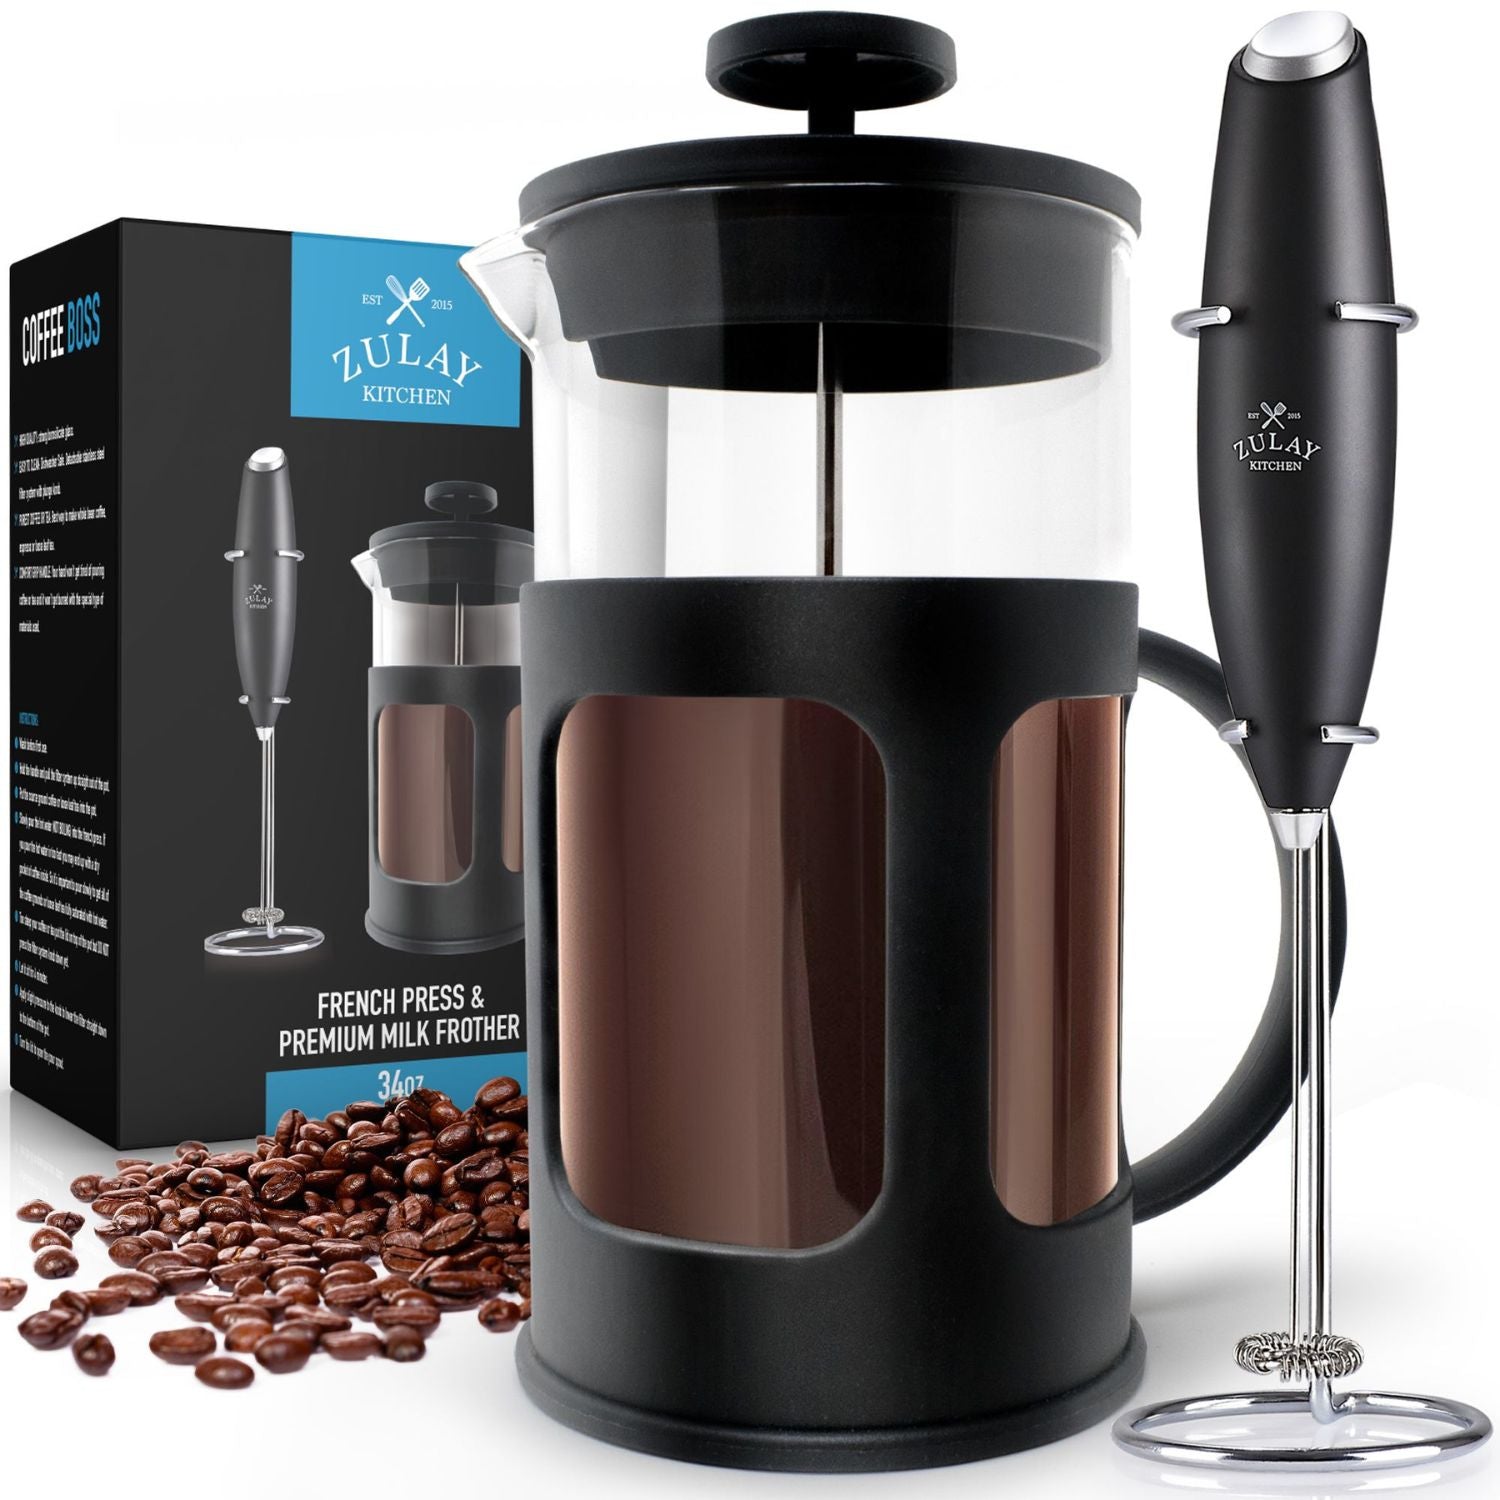 Coffee Tea Pot Manual French Pressed Coffee Maker Filter Expreso